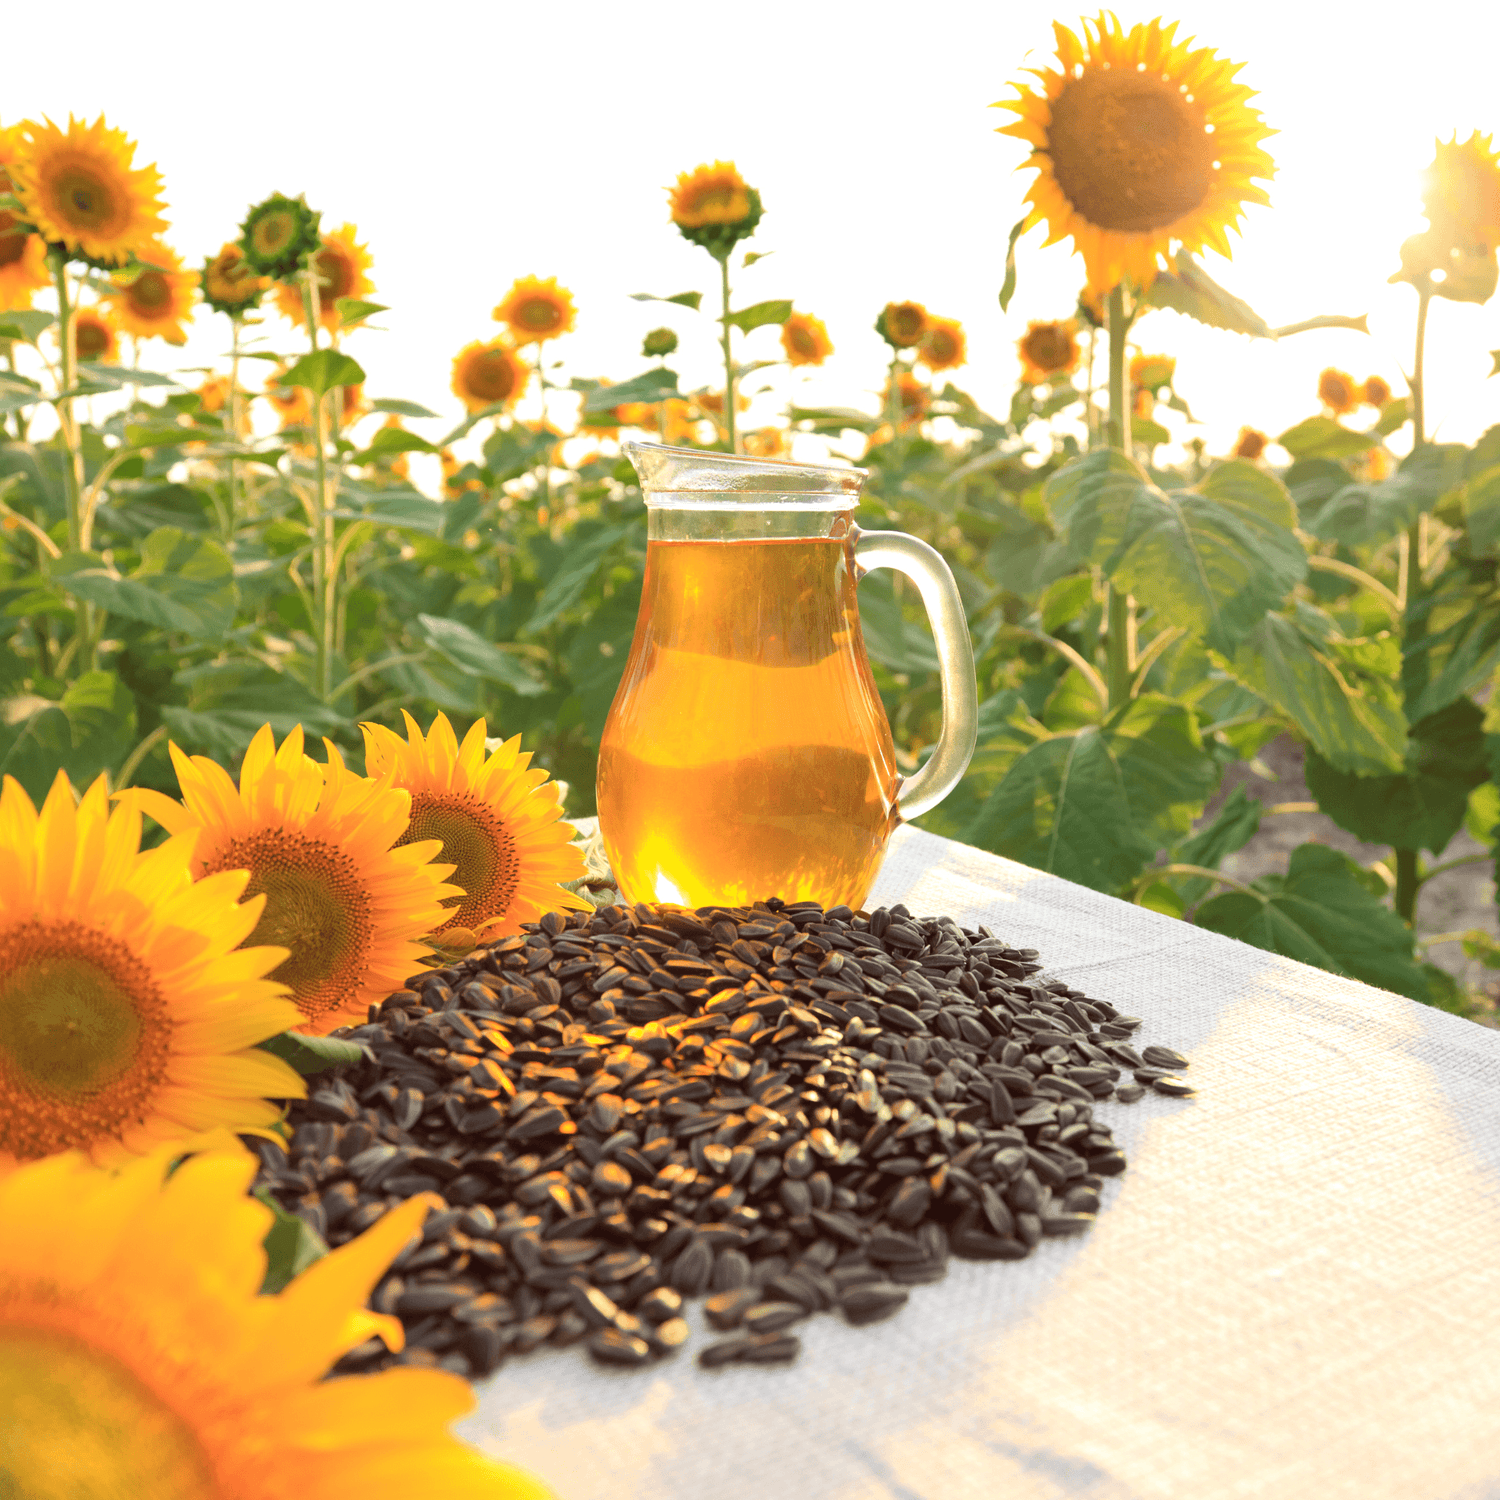 fresh sunflower seeds on a table in a sunflower field